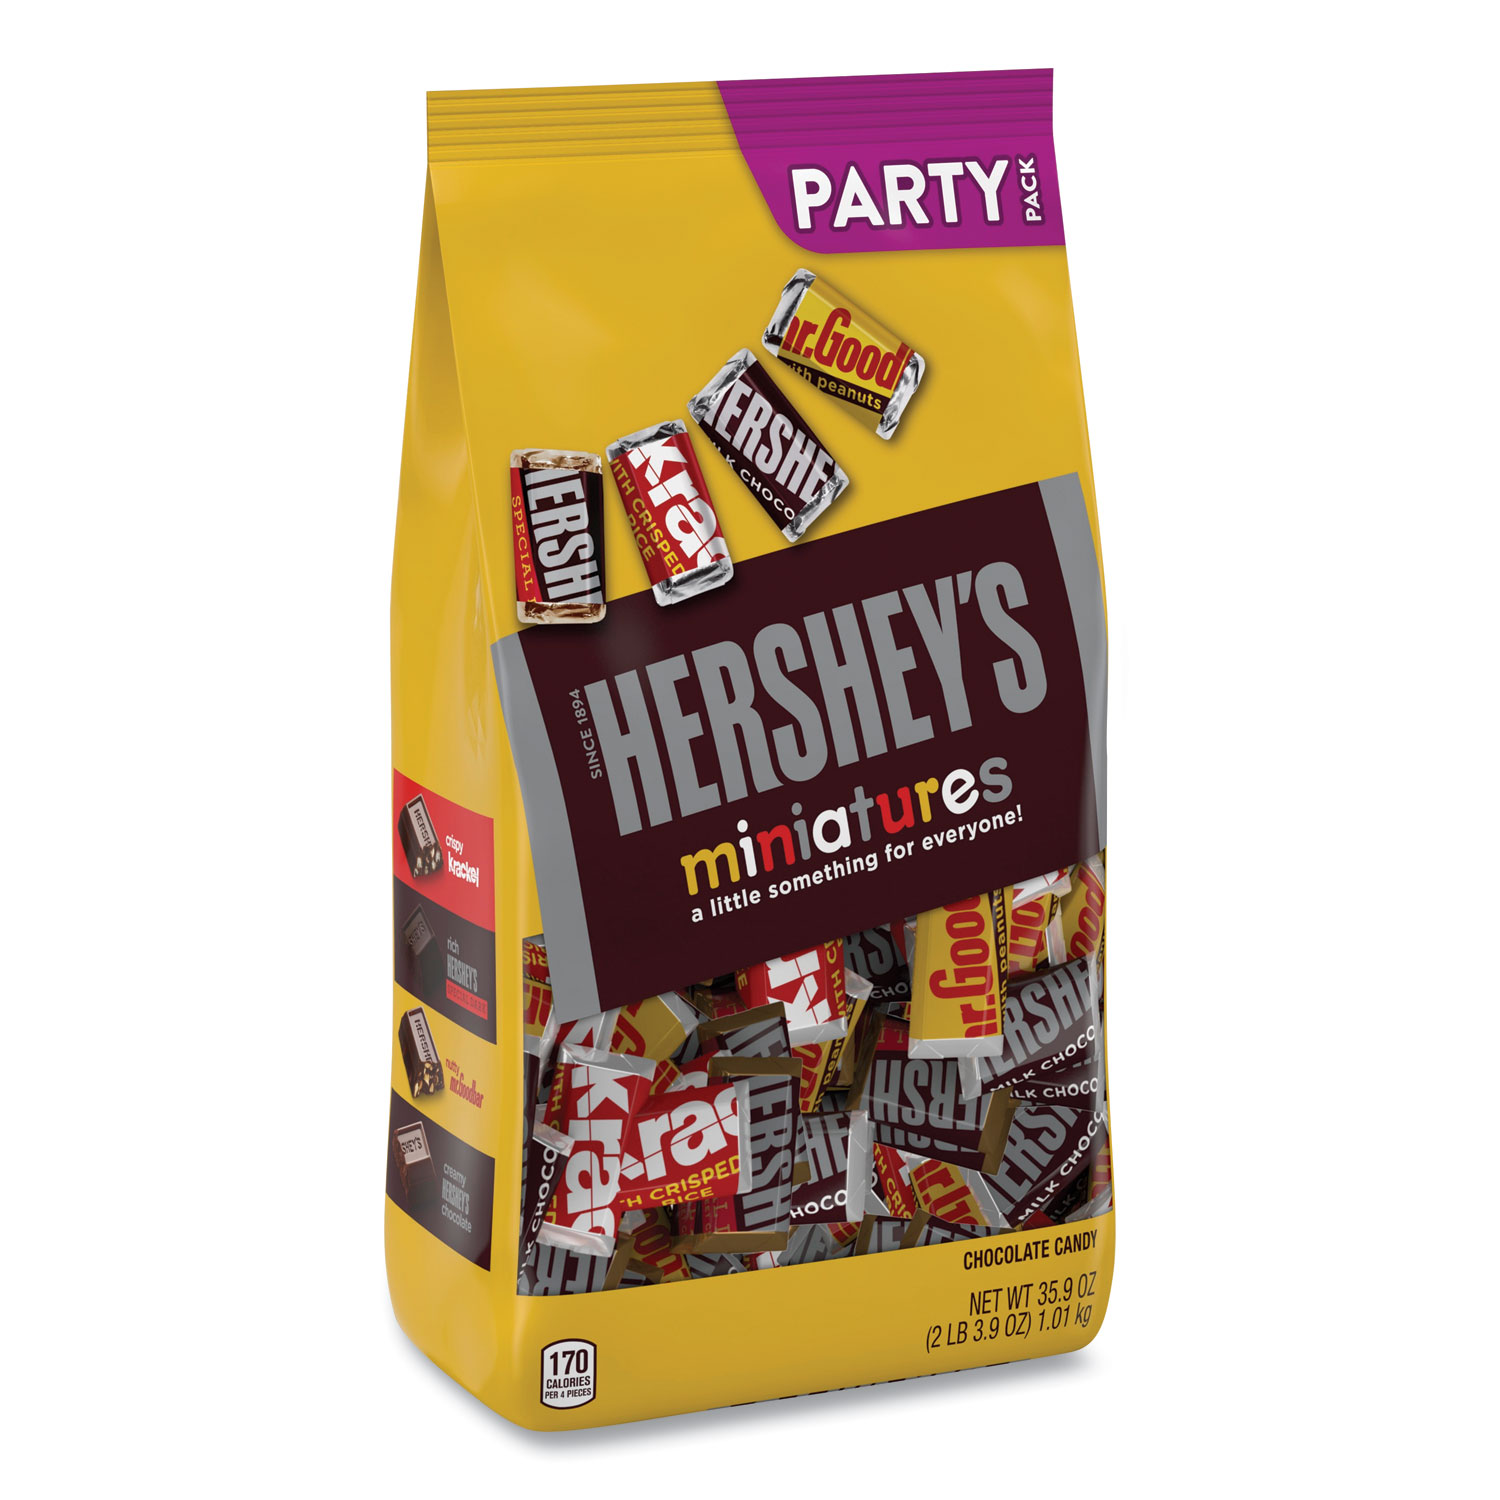  Hershey's 21458 Chocolate Miniatures Party Pack Assortment, 35.9 oz Bag, 2 Bags/Carton, Free Delivery in 1-4 Business Days (GRR24600403) 